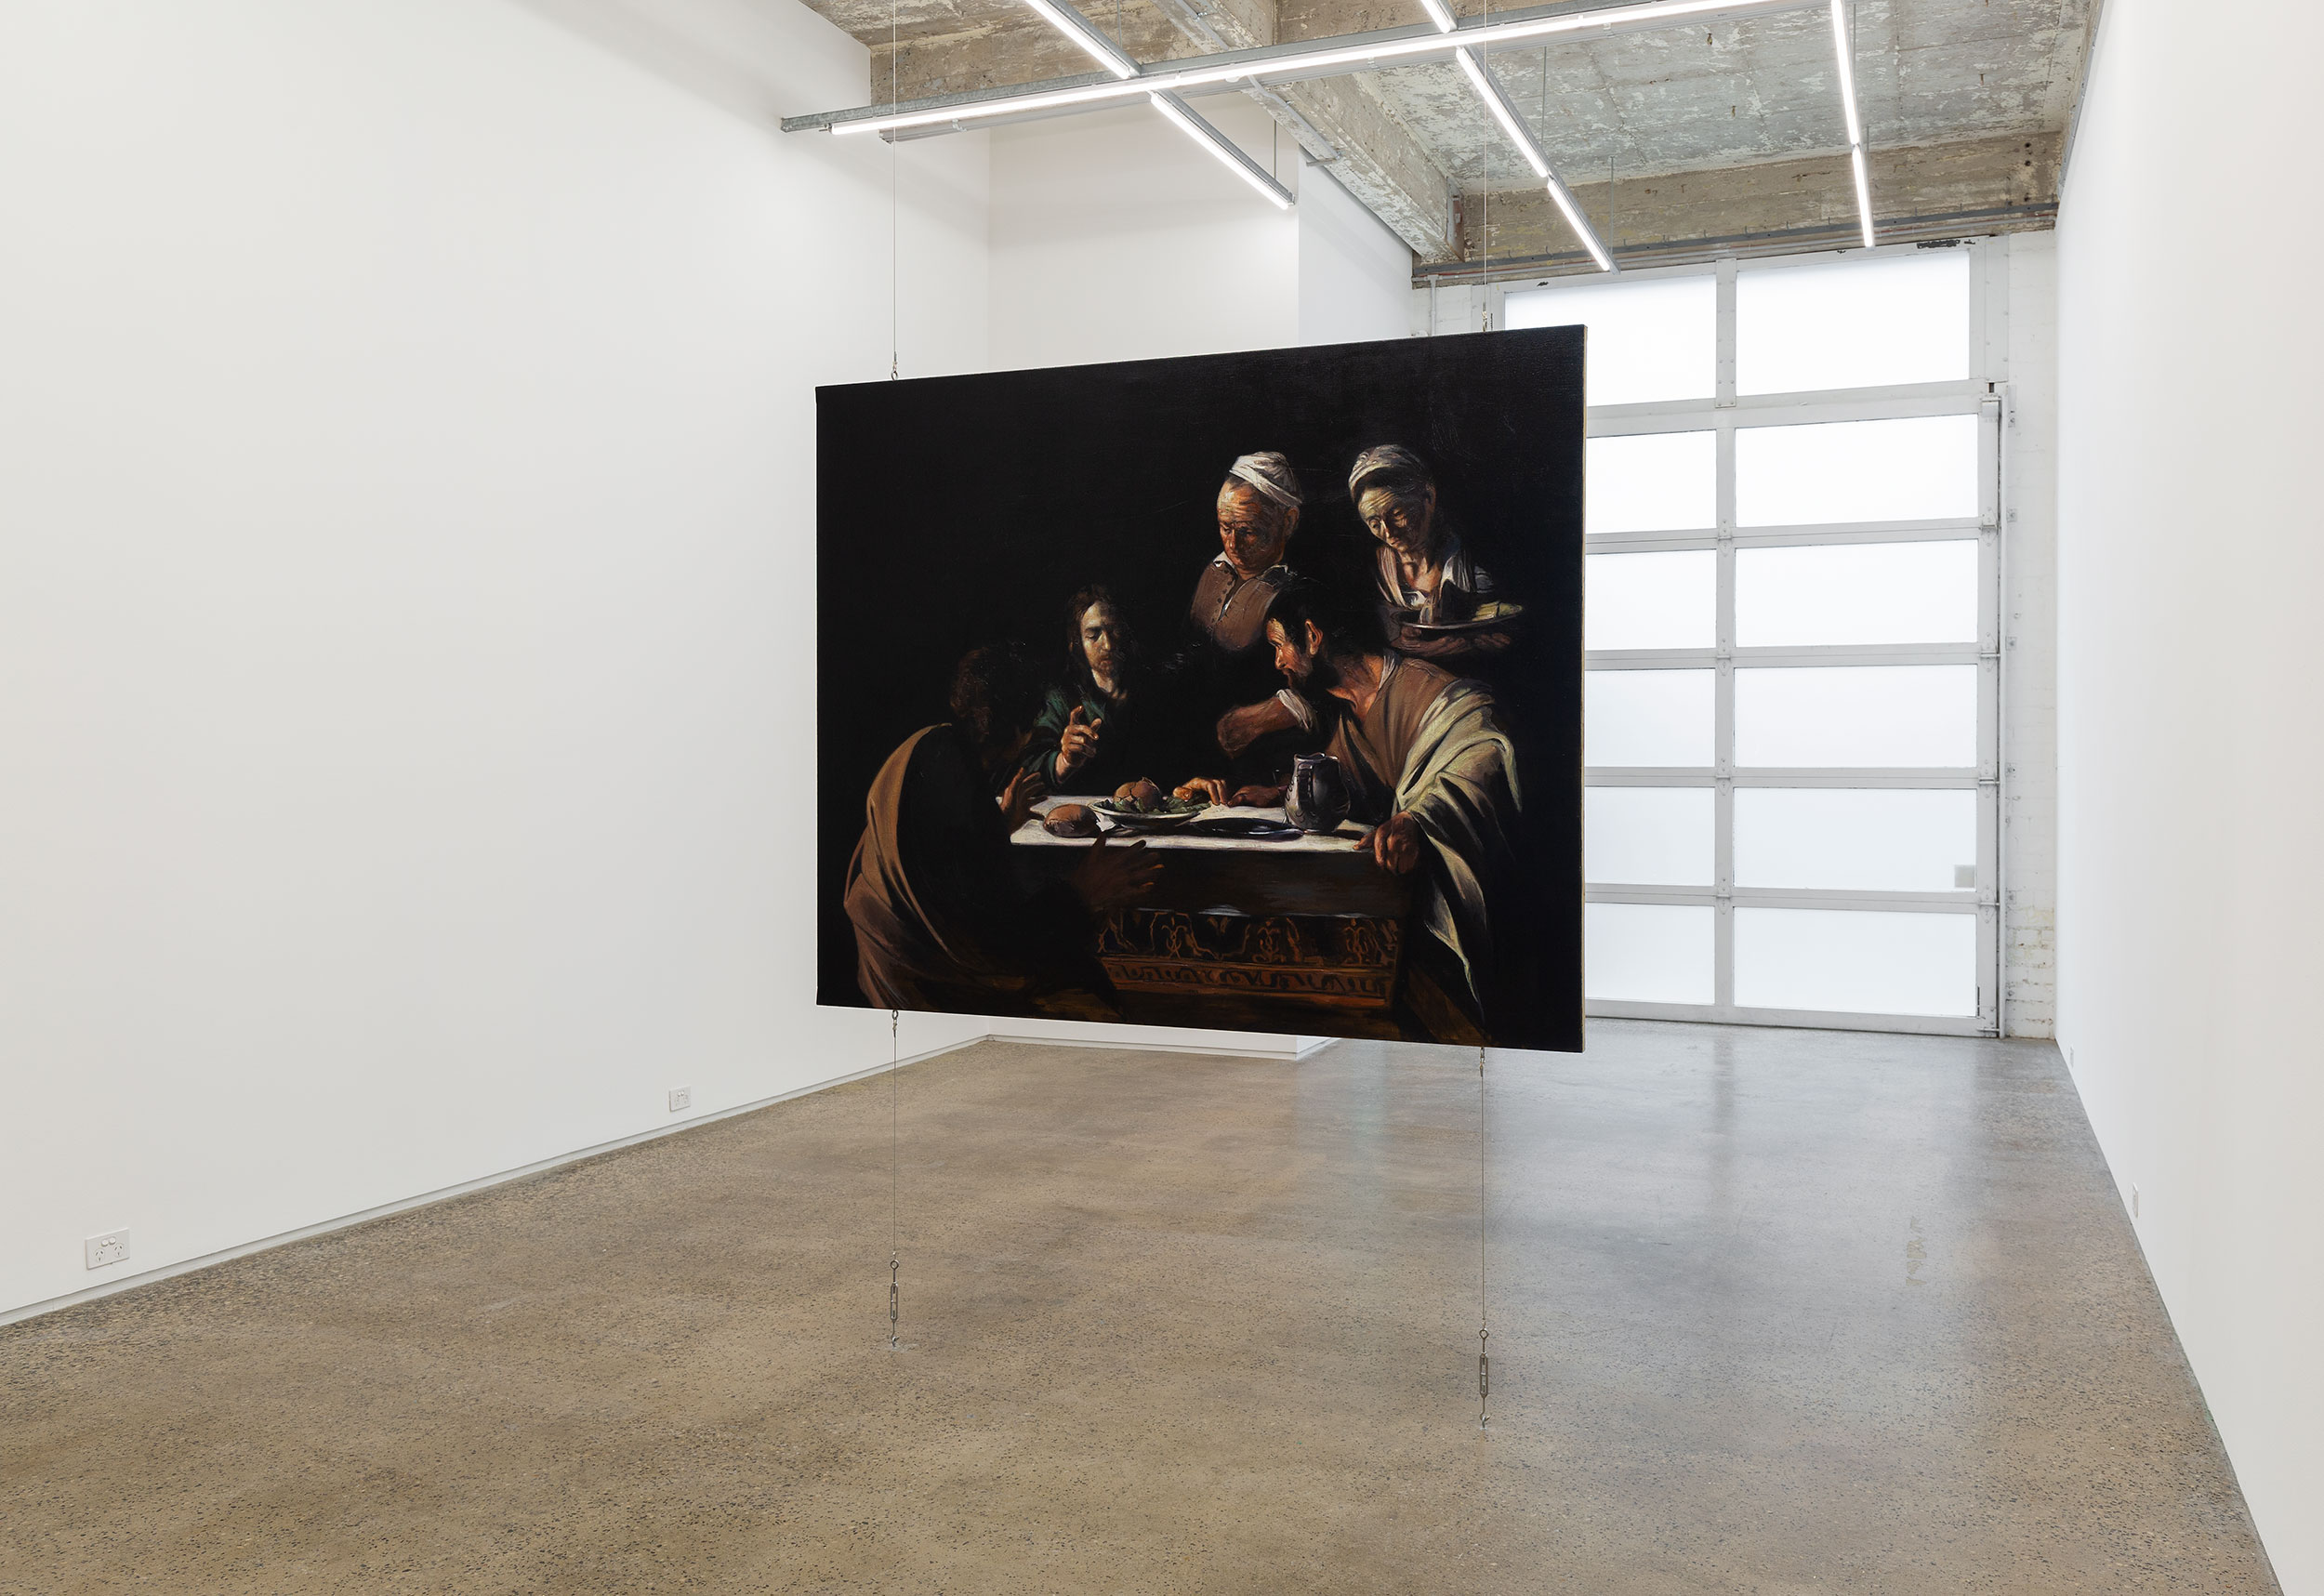 <p>Gian Manik, <em>You own the school, embrace your responsibility for its legacy</em>, presented at Gertrude Glasshouse, 2024. Courtesy of the artist and Sutton Gallery, Naarm Melbourne. Photo: Christian Capurro</p>